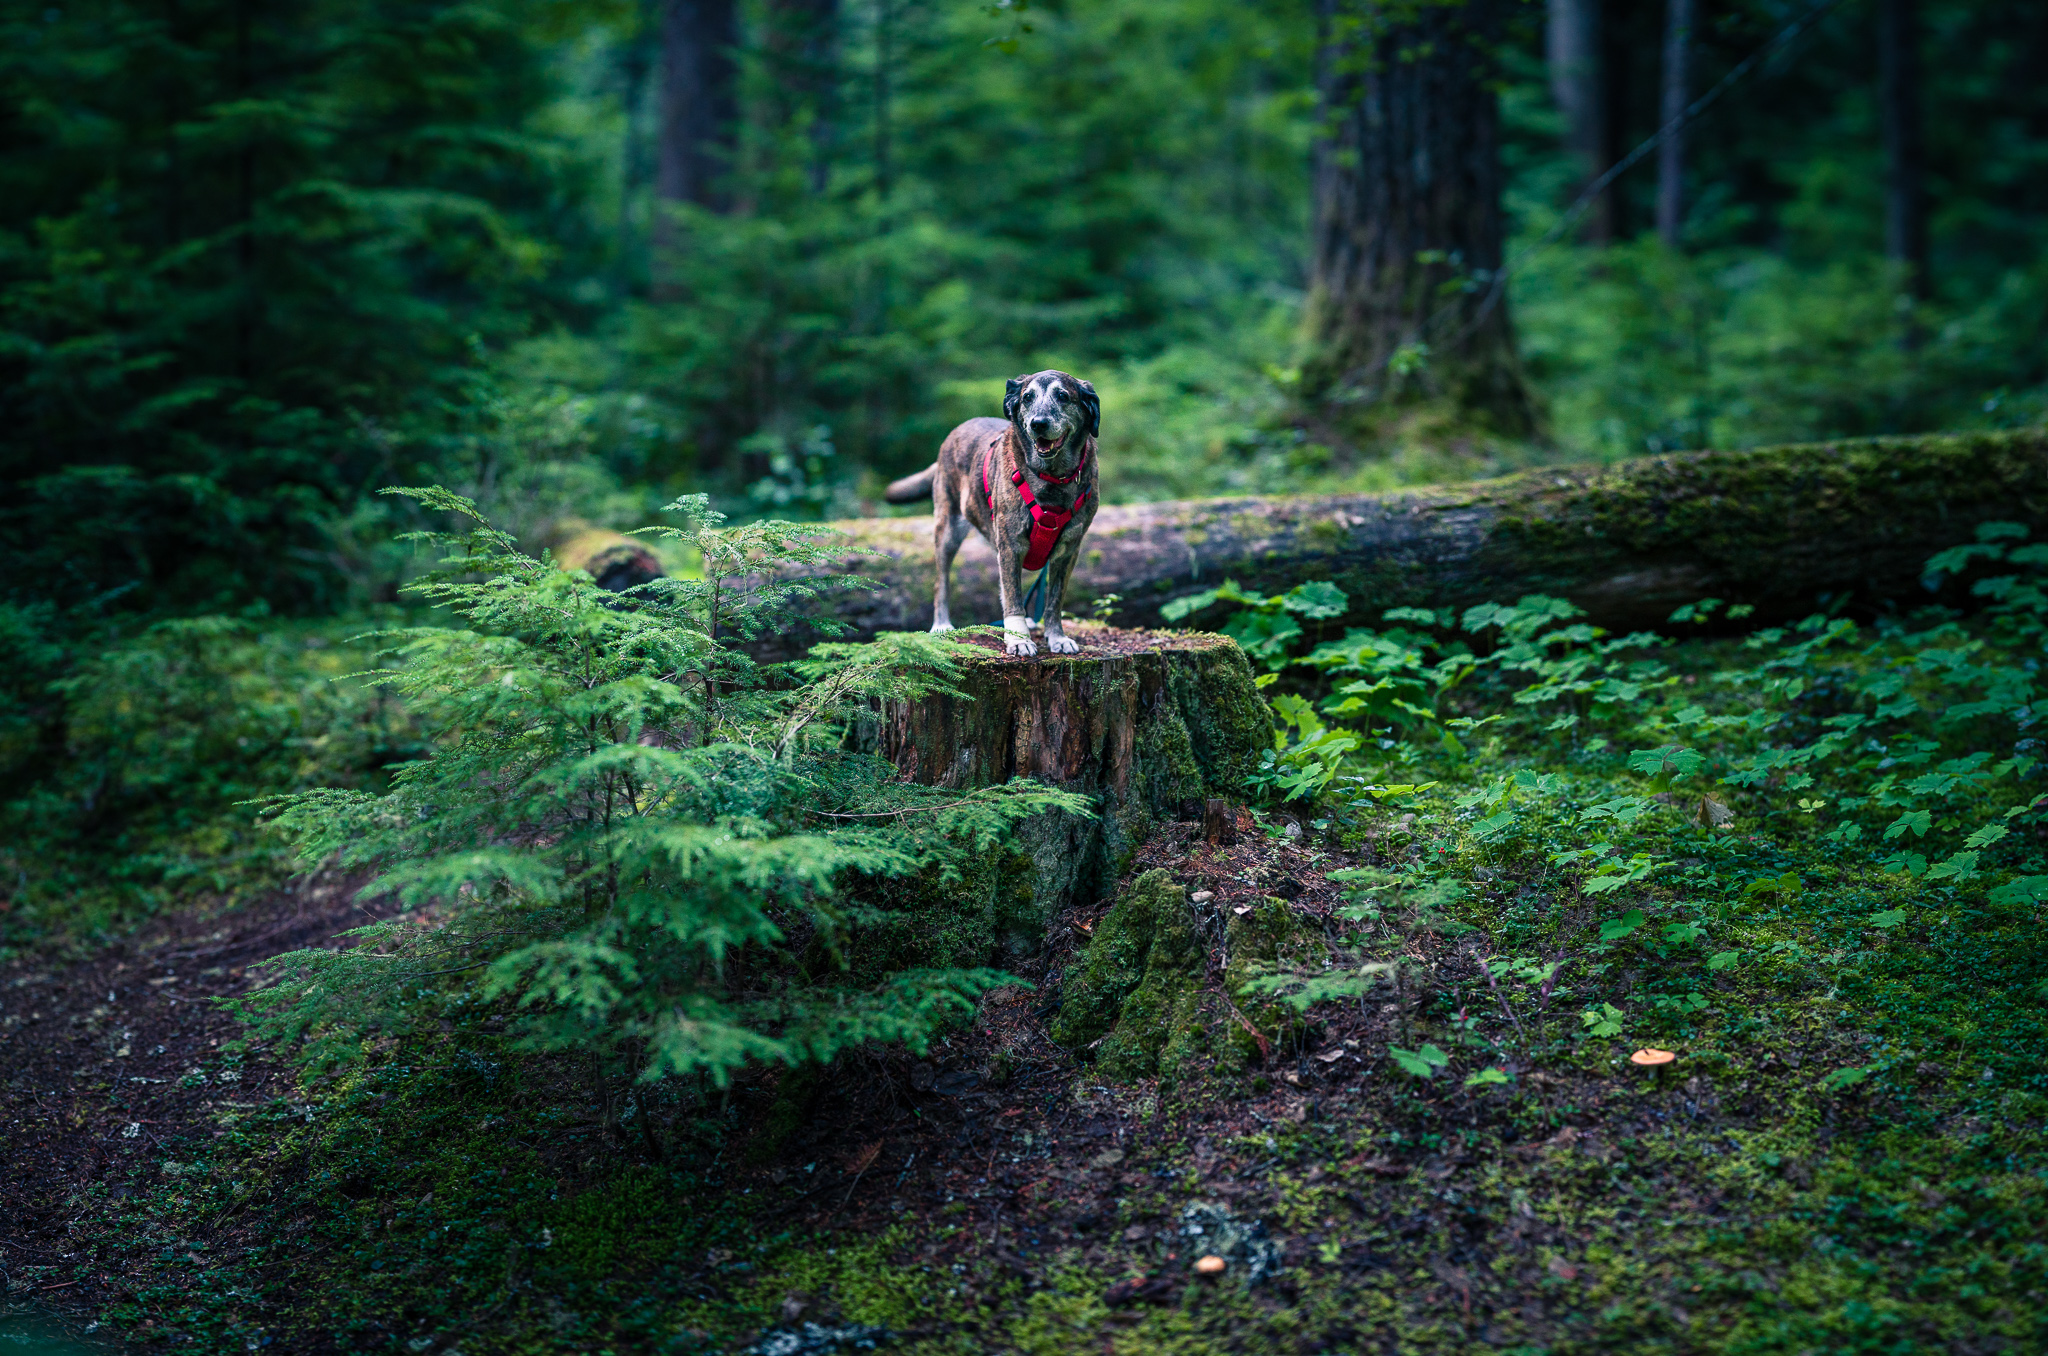 Tiger dog standing on tree stump surrounded by lush green forest.